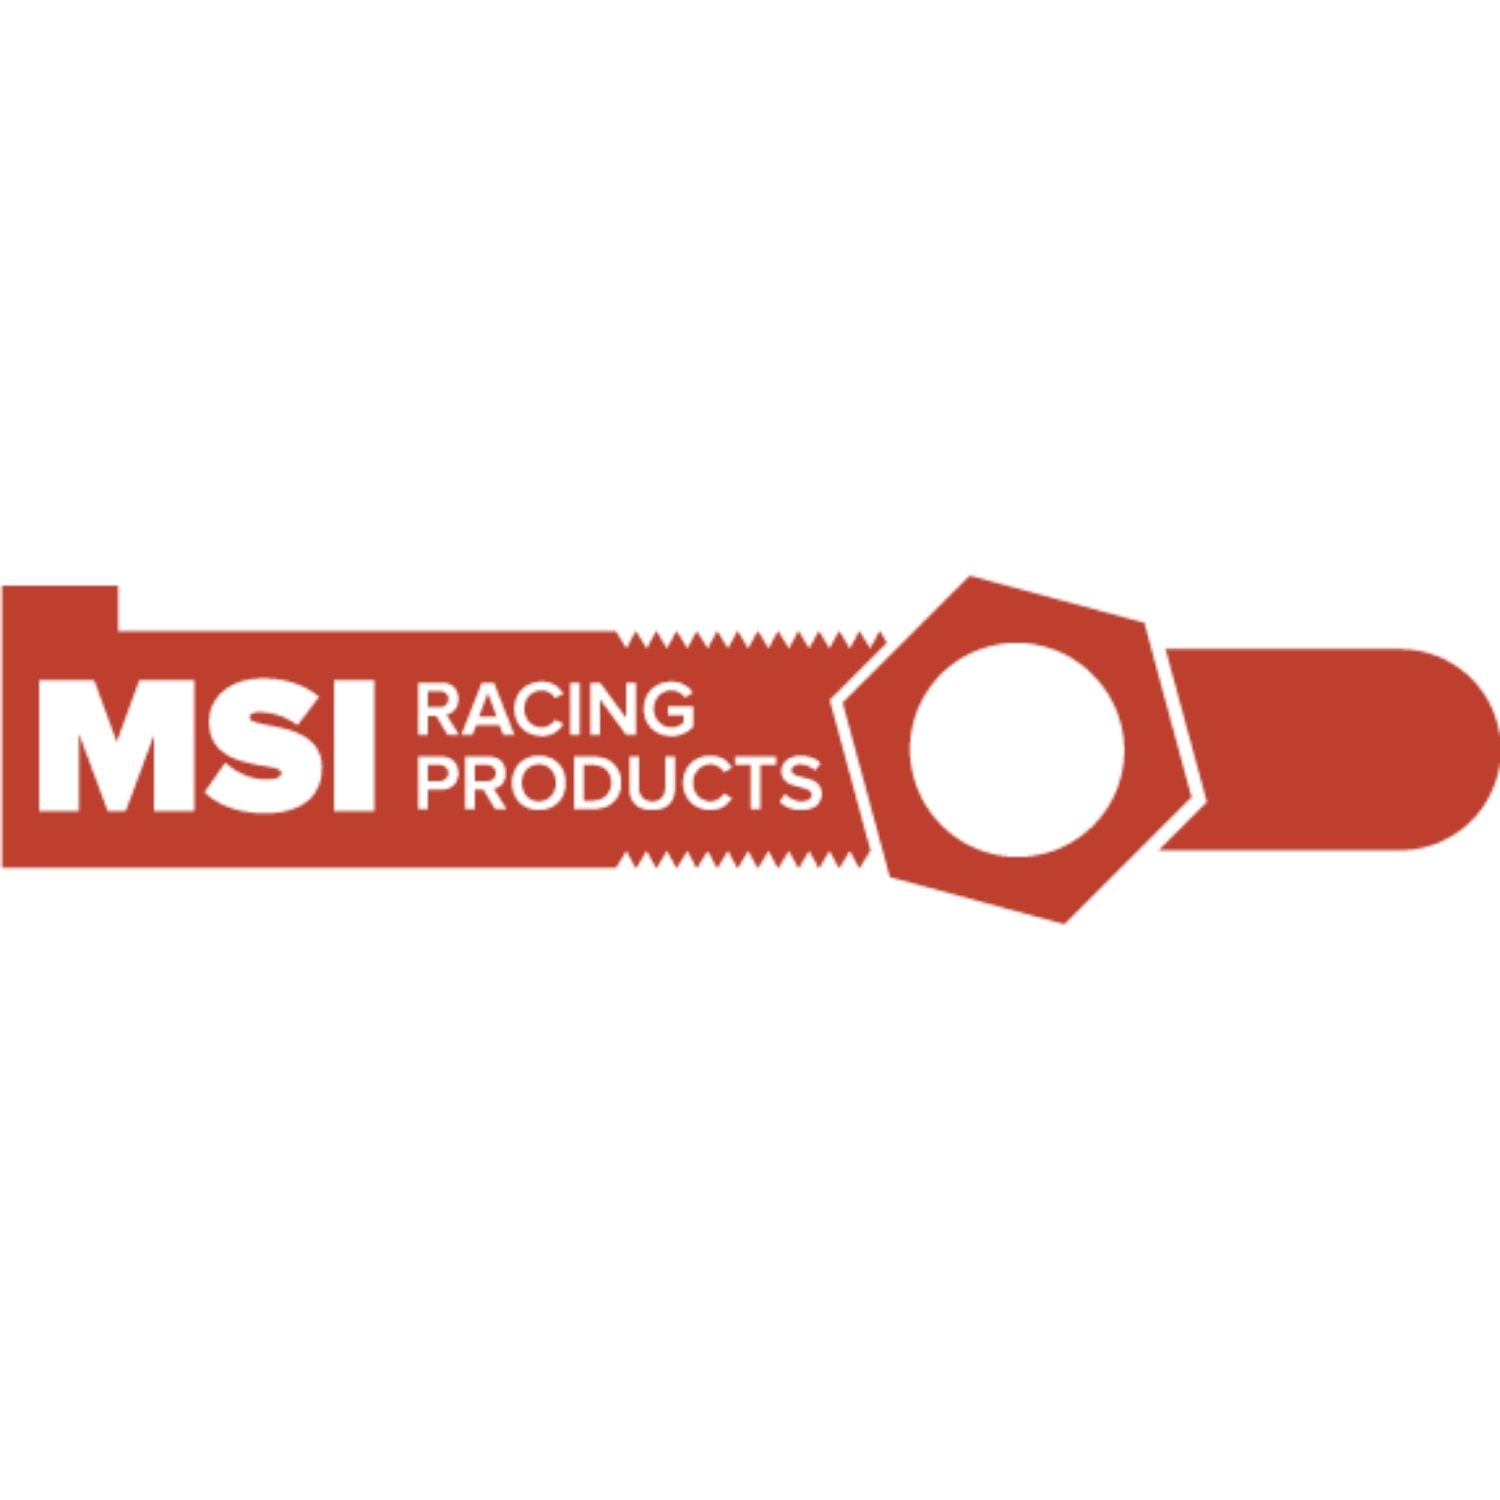 MSI Racing Products